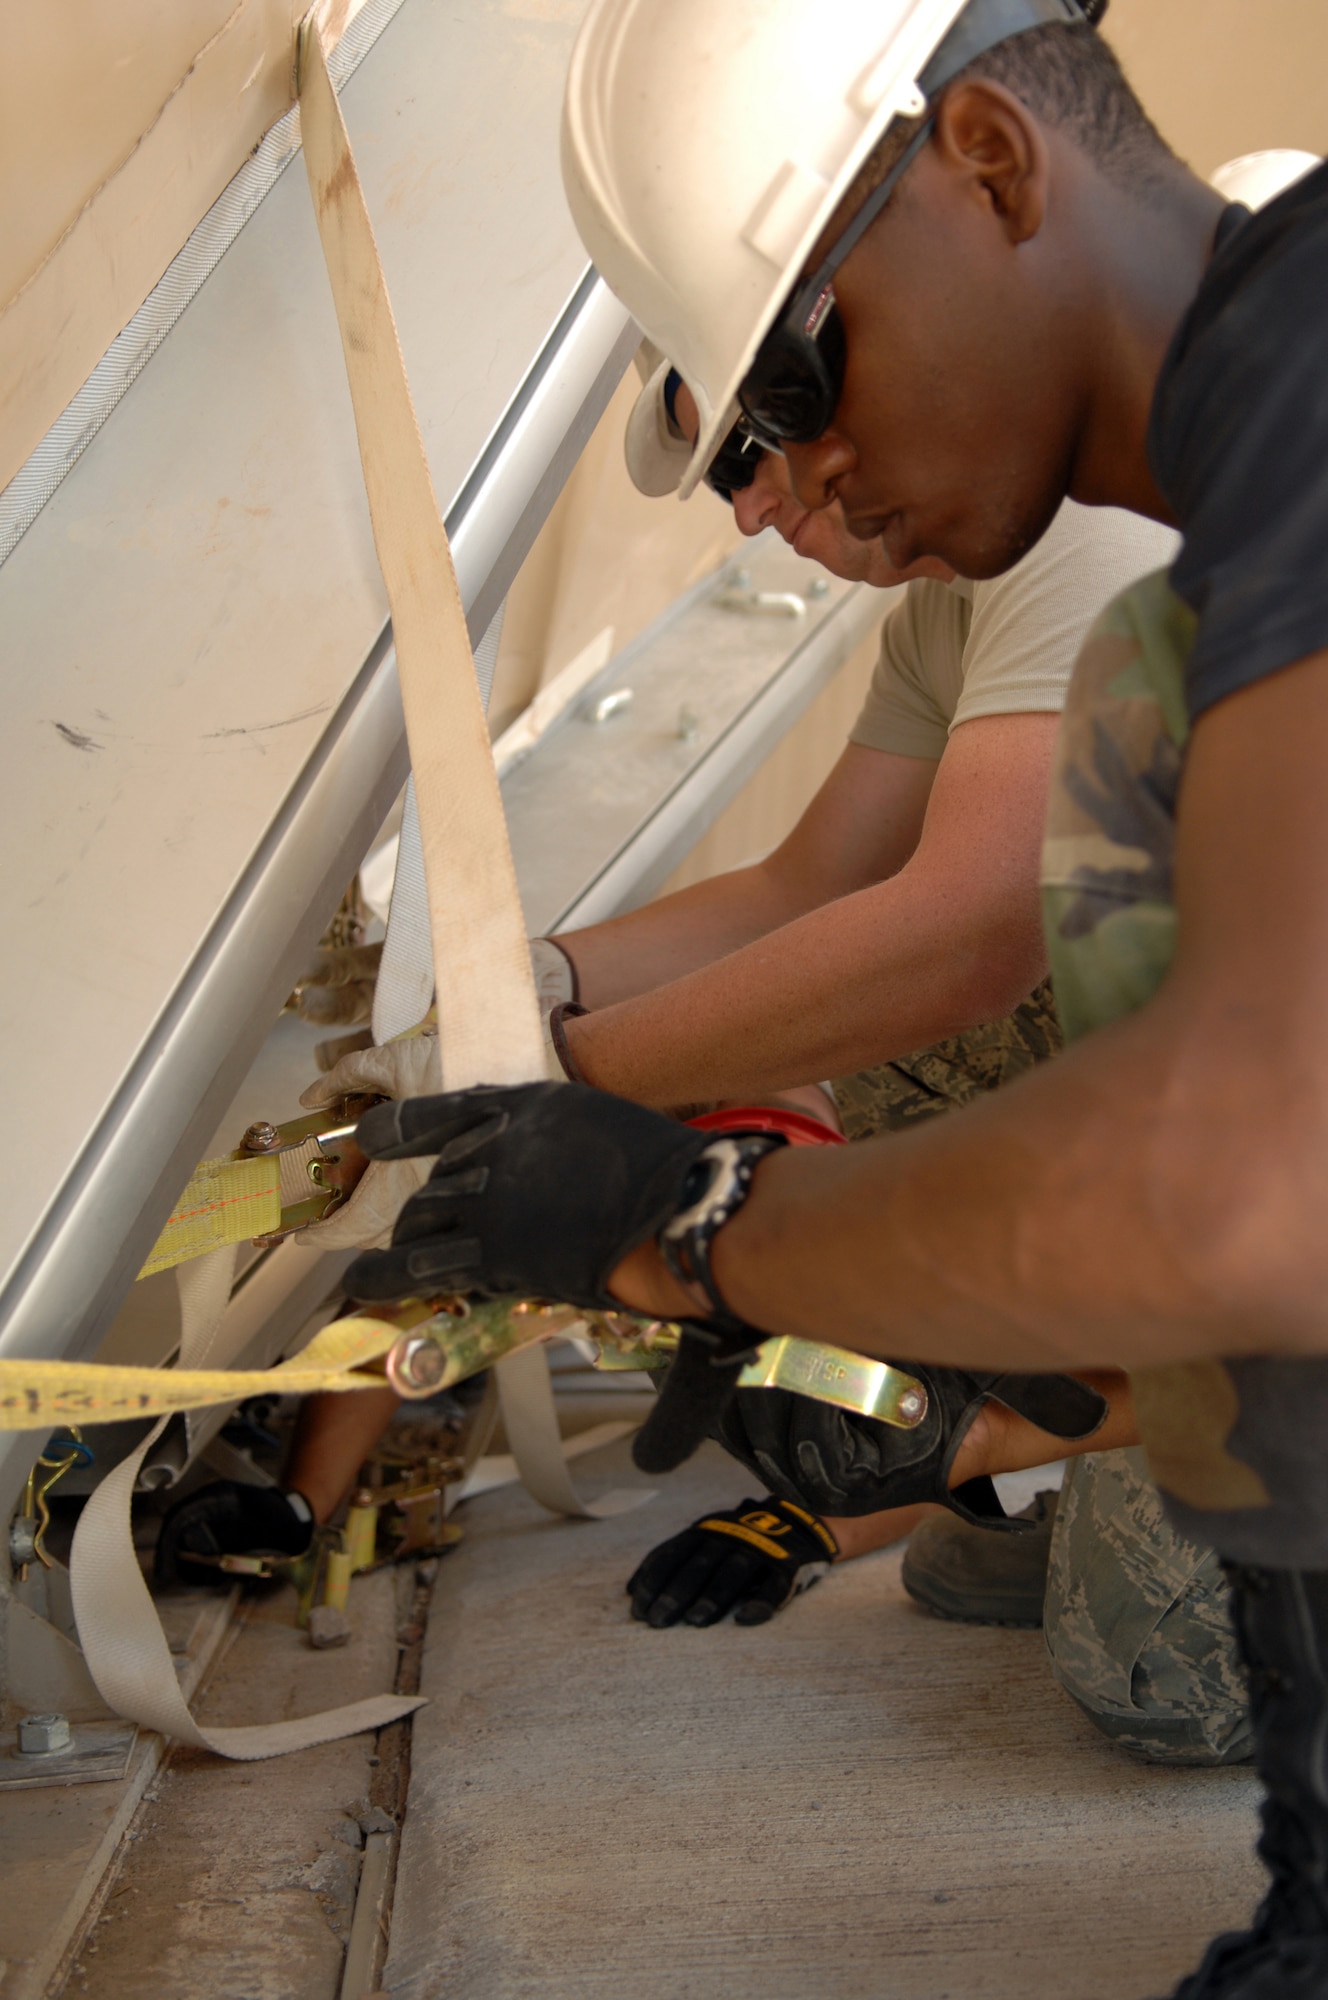 Airman 1st Class Chauncy Williams, 49th Material Maintenance Squadron, and Staff Sgt. Shawn Cullen, 49th Civil Engineer Squadron, attach door fabric tensioning straps to their ratchets in the setting up of a BEAR Base dome shelter June 3 at Holloman Air Force Base, N.M. The students set up the shelter as a part of the Structural Contingency Course lesson plan. They tore down the shelter earlier and returned it to operational status the same day. (U.S. Air Force photo/Airman Sondra M. Wieseler)